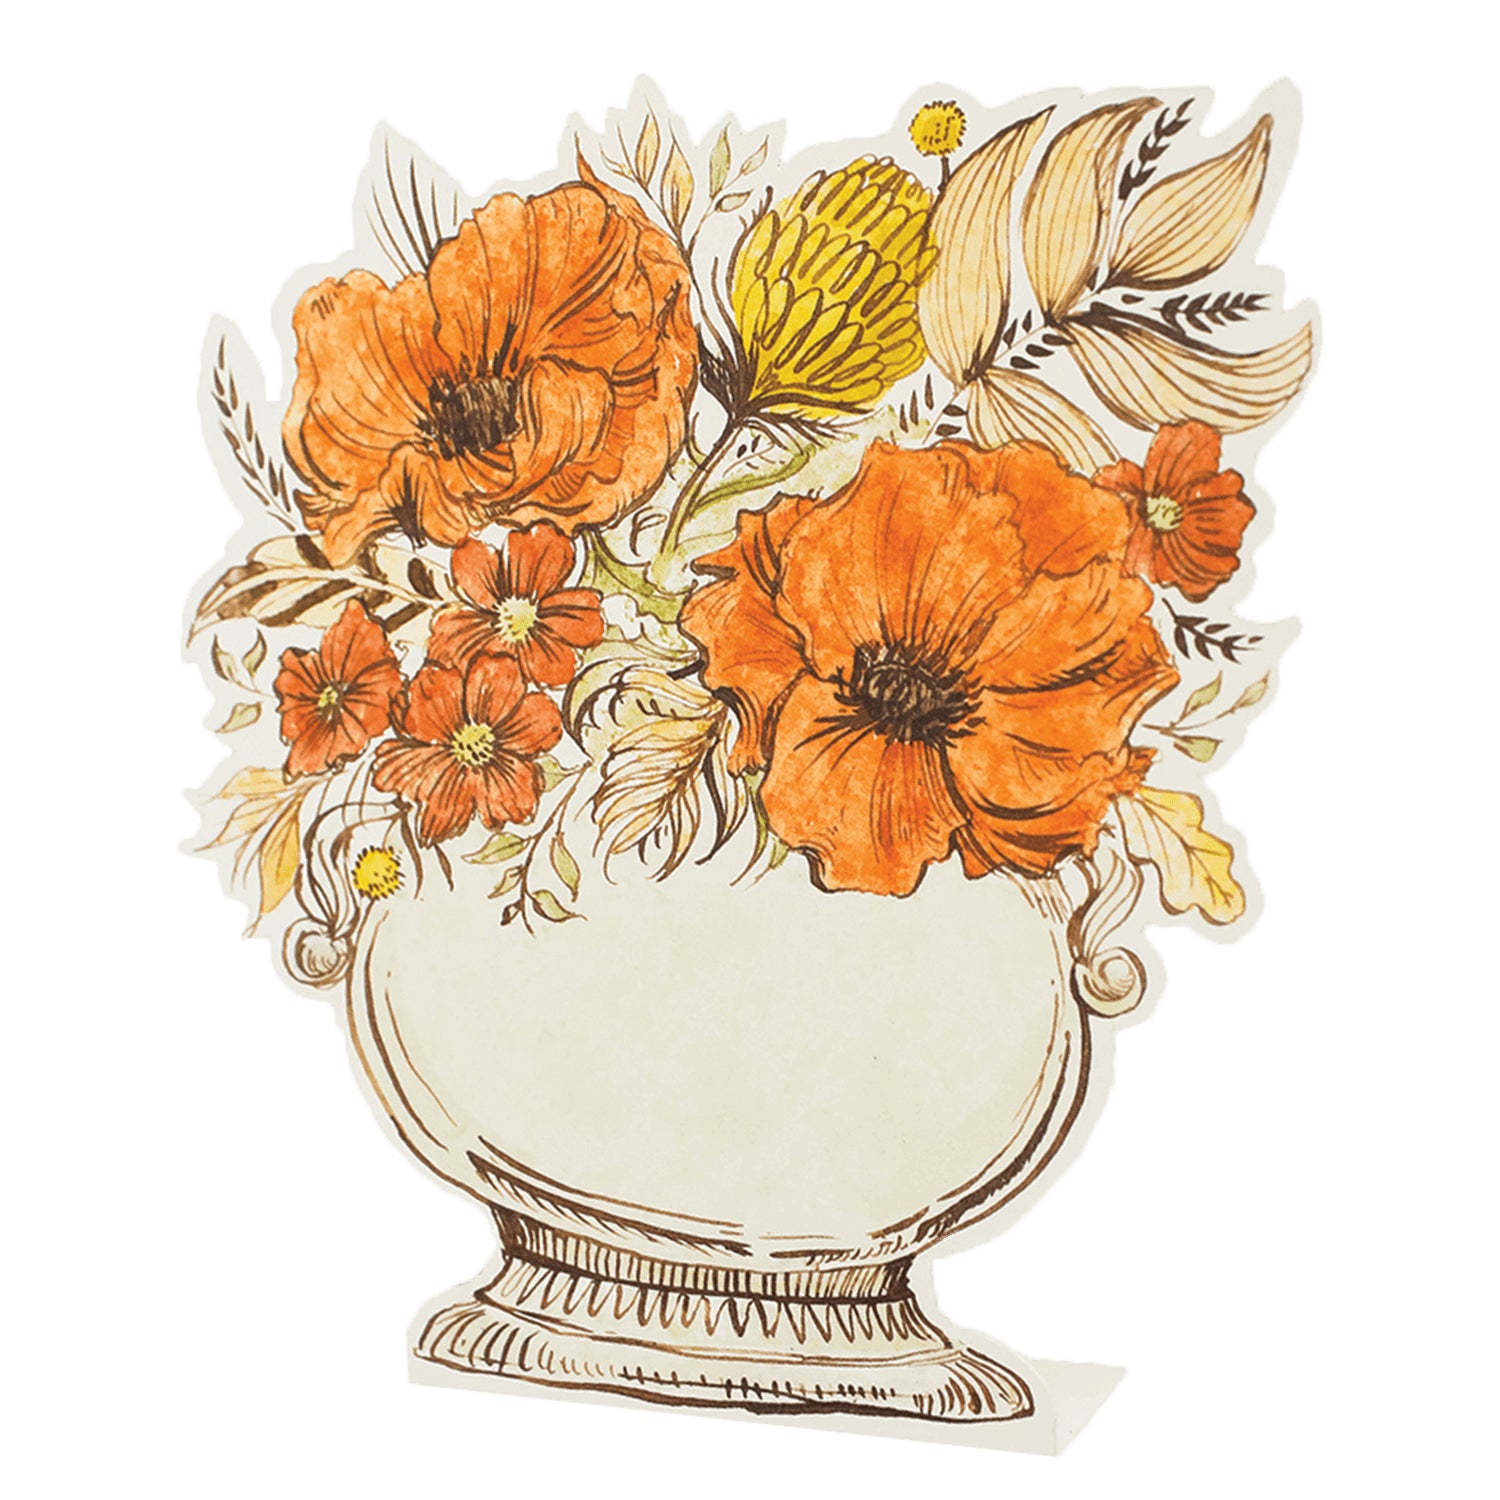 A die-cut, free-standing place card featuring a blank white vase full of vibrant orange and yellow flowers with light tan foliage.